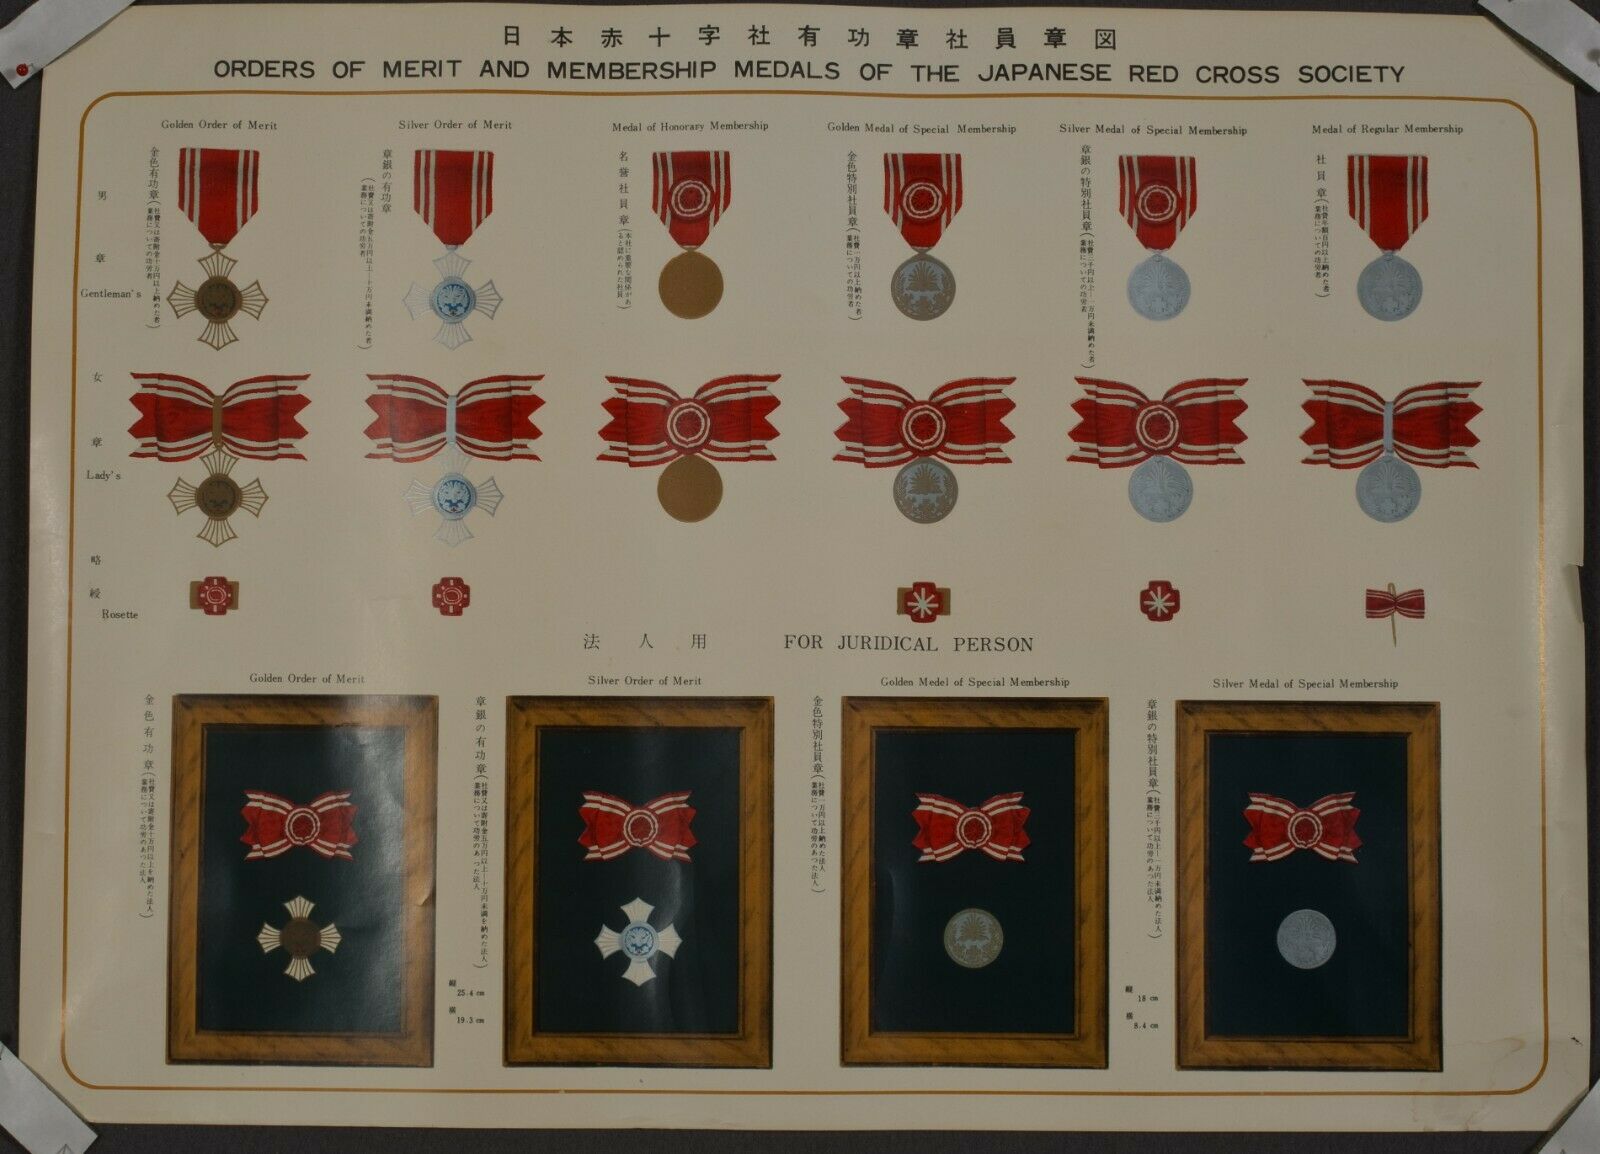 Official Chart of Orders of Merit and Membership Medals of the Japanese Red Cross Society.jpg